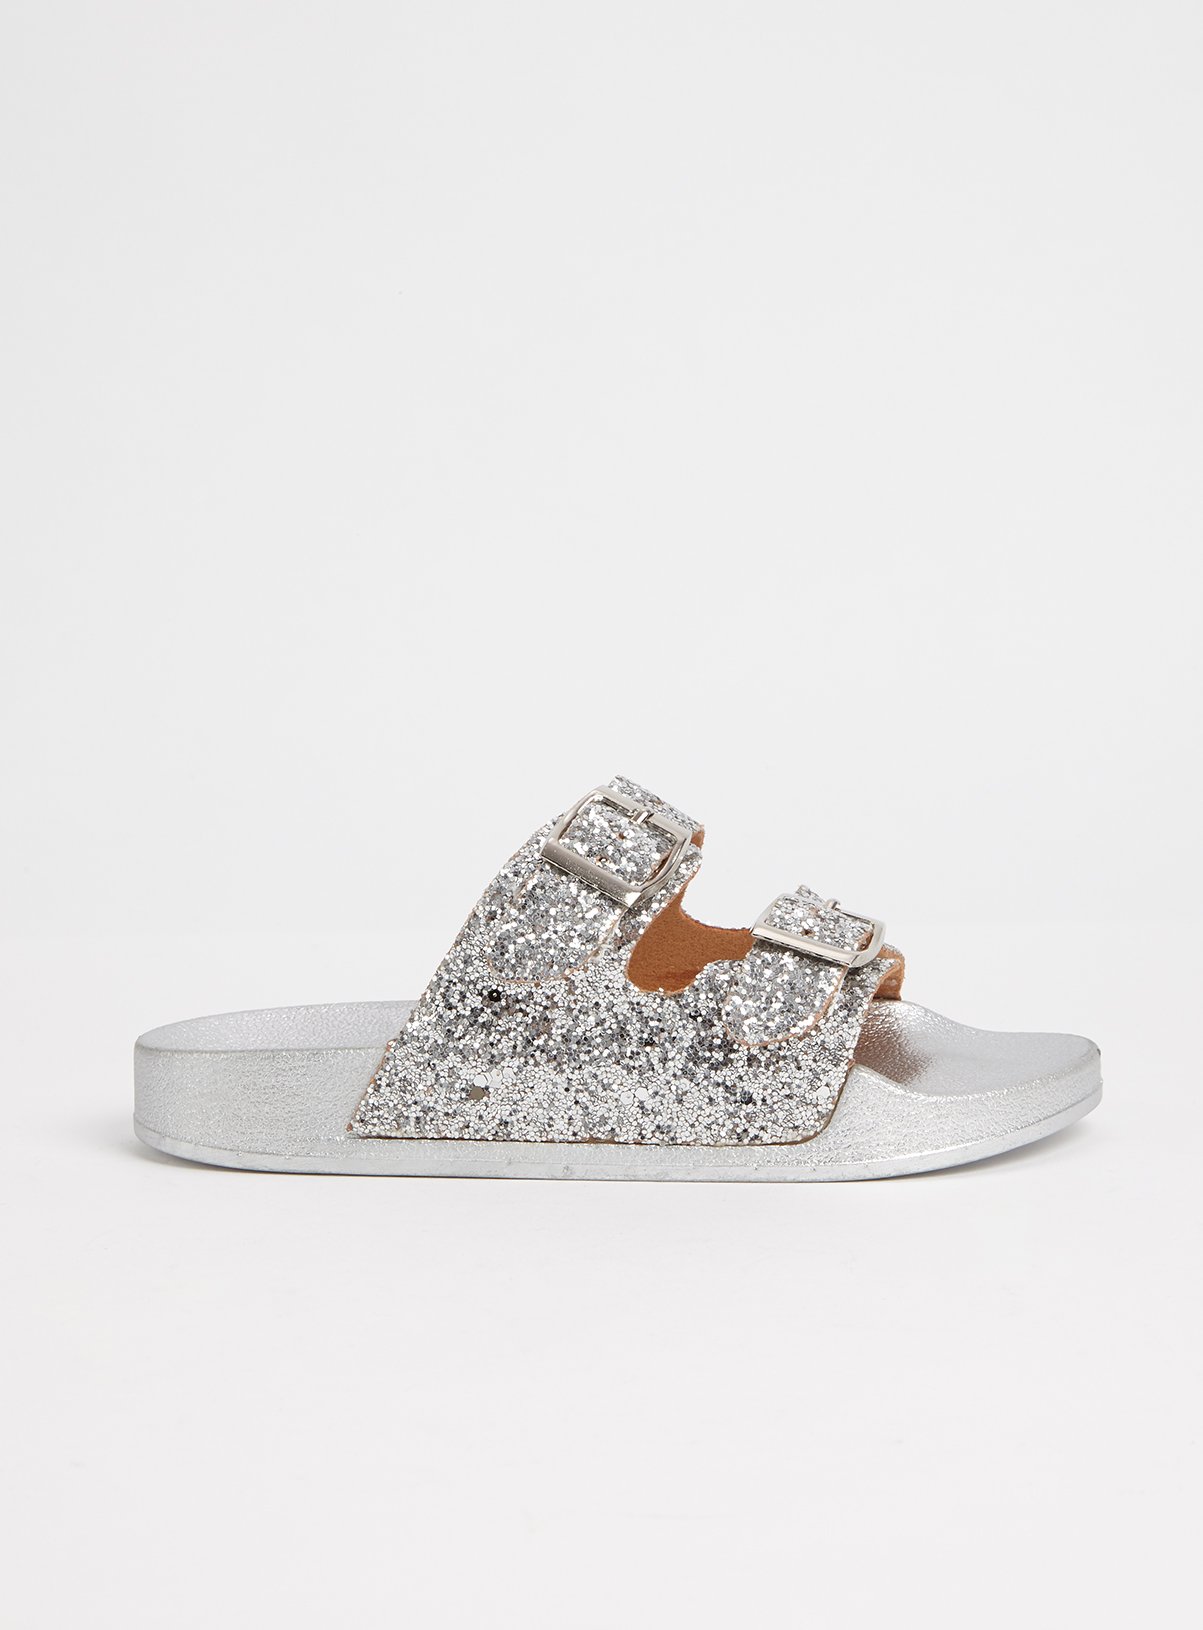 Silver Glitter Buckle Sliders Review